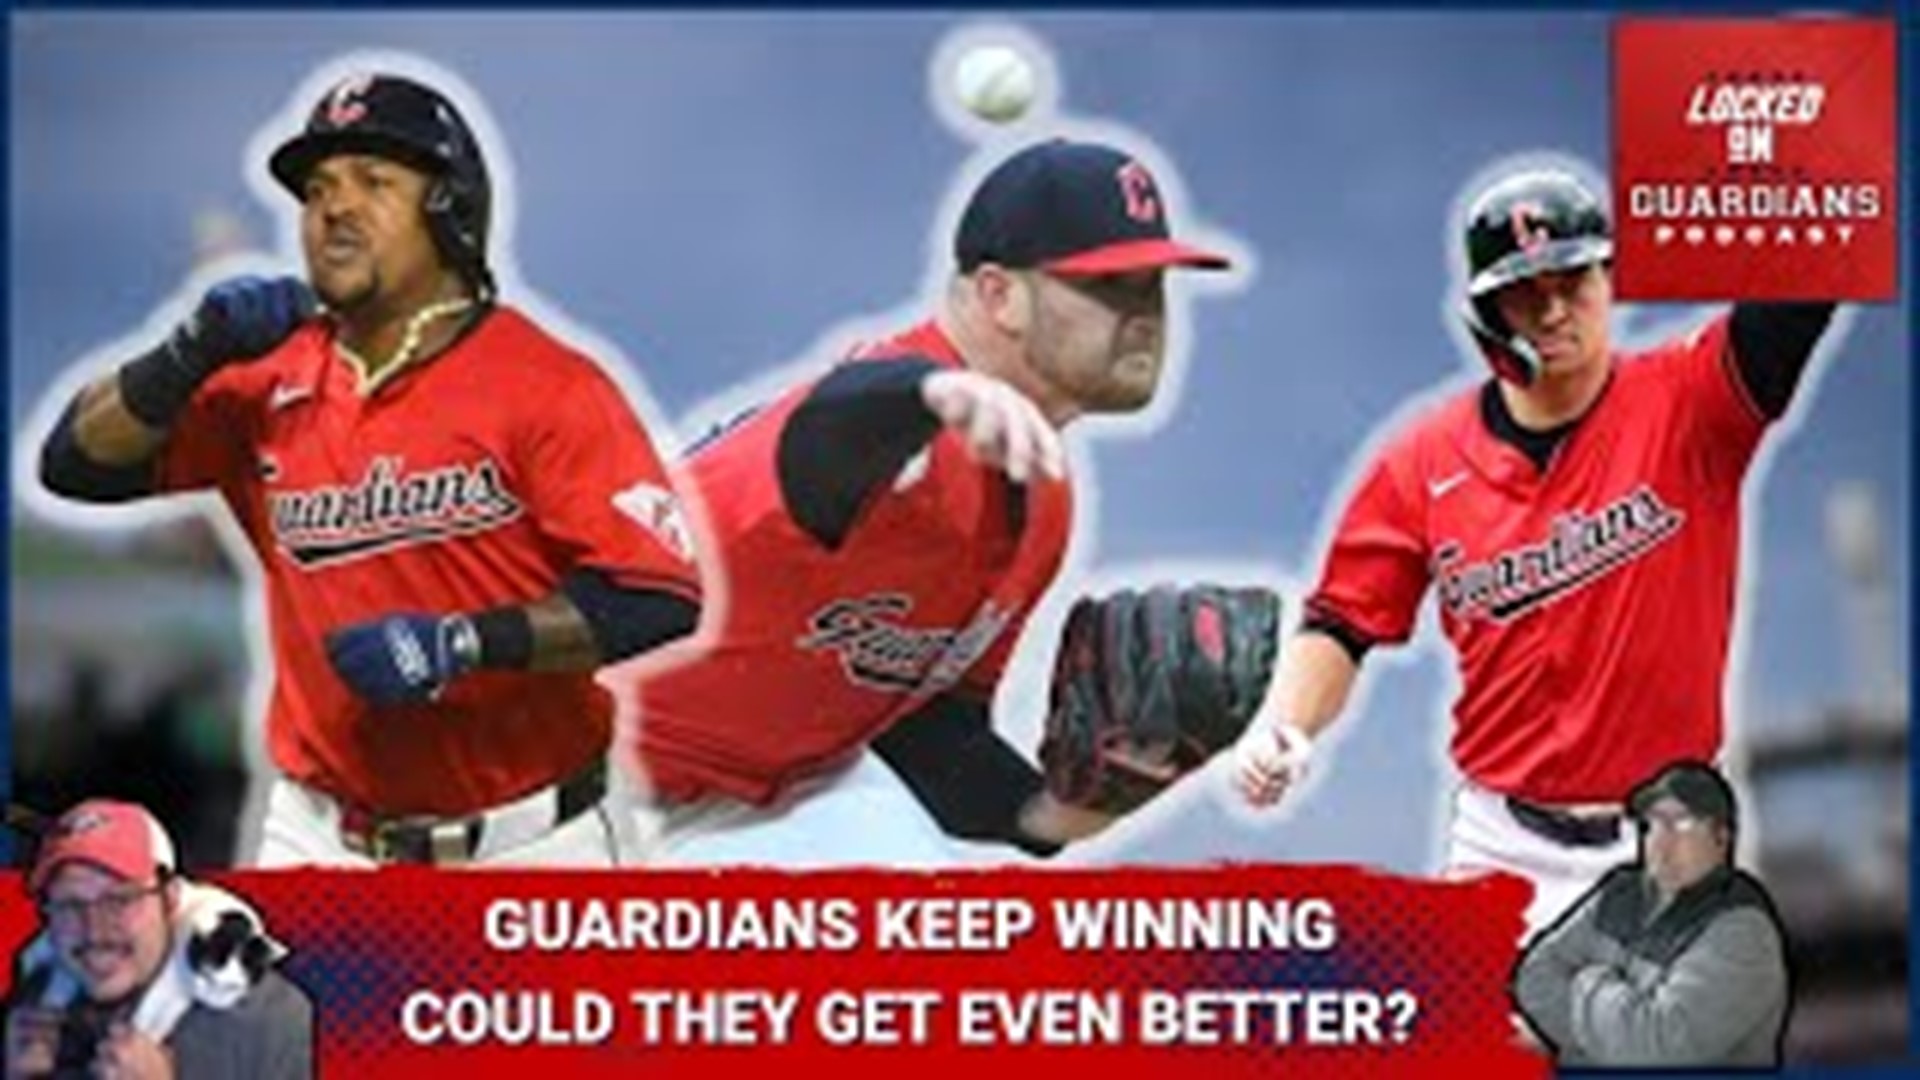 The Guardians finally got six innings from a starting pitcher for the first time since April 3, and they scored four runs for the fifth straight game.